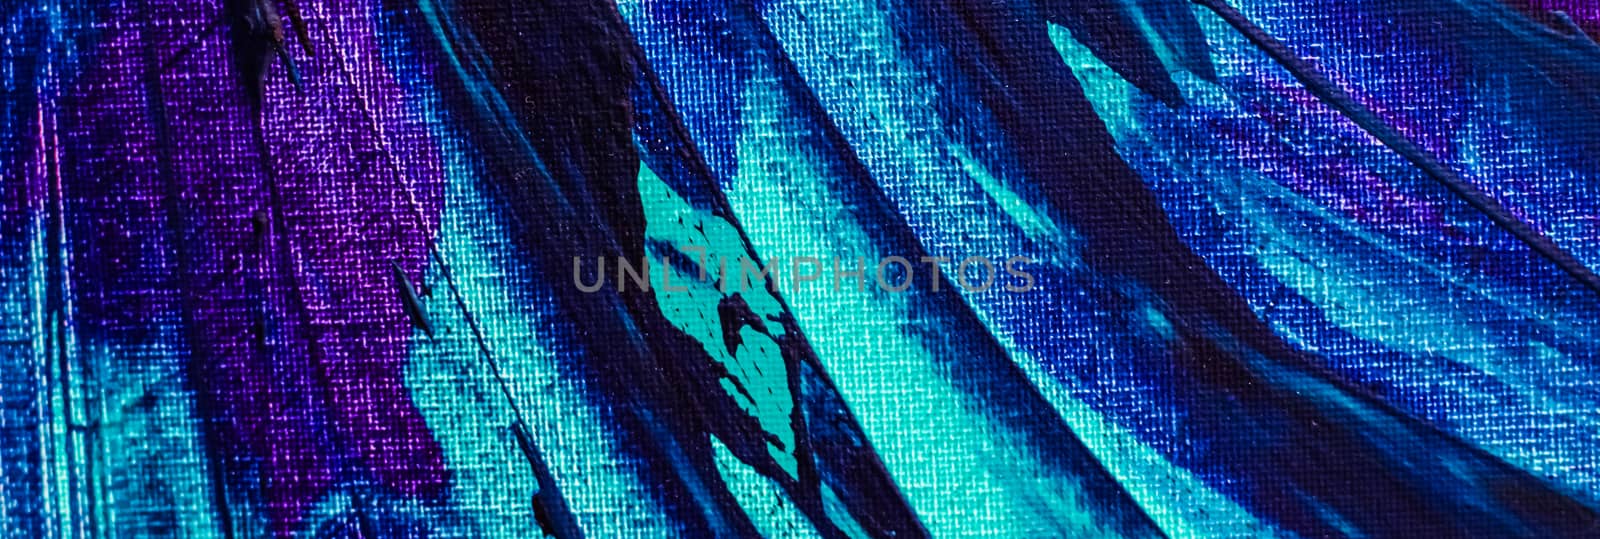 Mix of blue, turquoise and purple abstract background, painting  by Anneleven